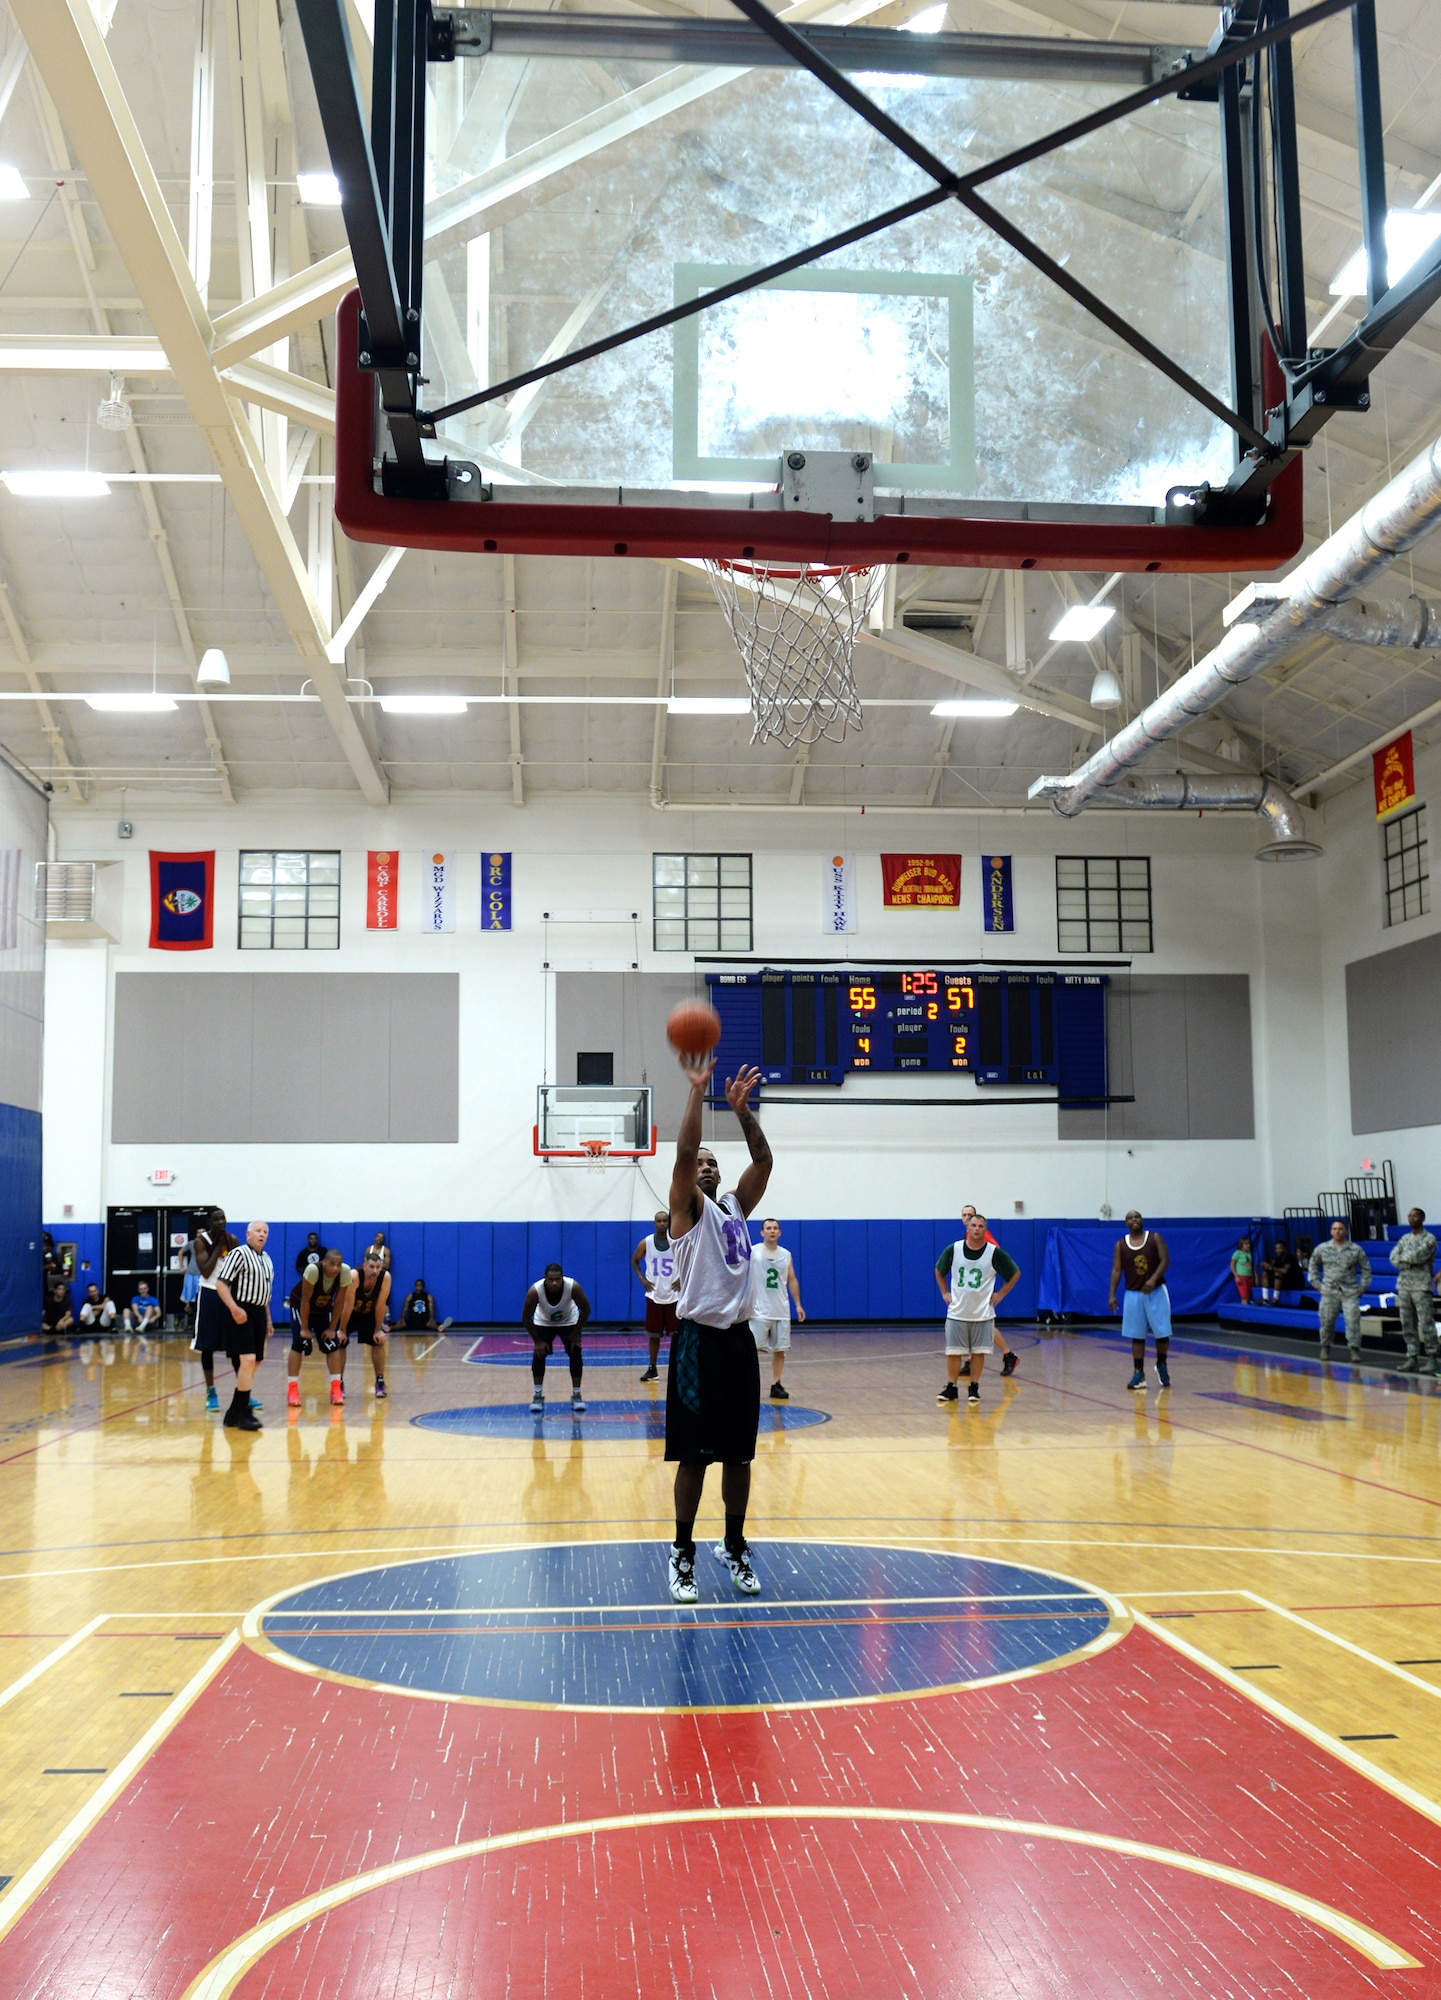 Mike Newsome, 36th Medical Group, shoots a free throw after being fouled during the over-thirty championship basketball game March 12, 2015, at Andersen Air Force Base, Guam. The 36th Security Forces Squadron defeated the 36th MDG 57-56 to win the championship overall. (U.S. Air Force photo by Senior Airman Amanda Morris/Released)